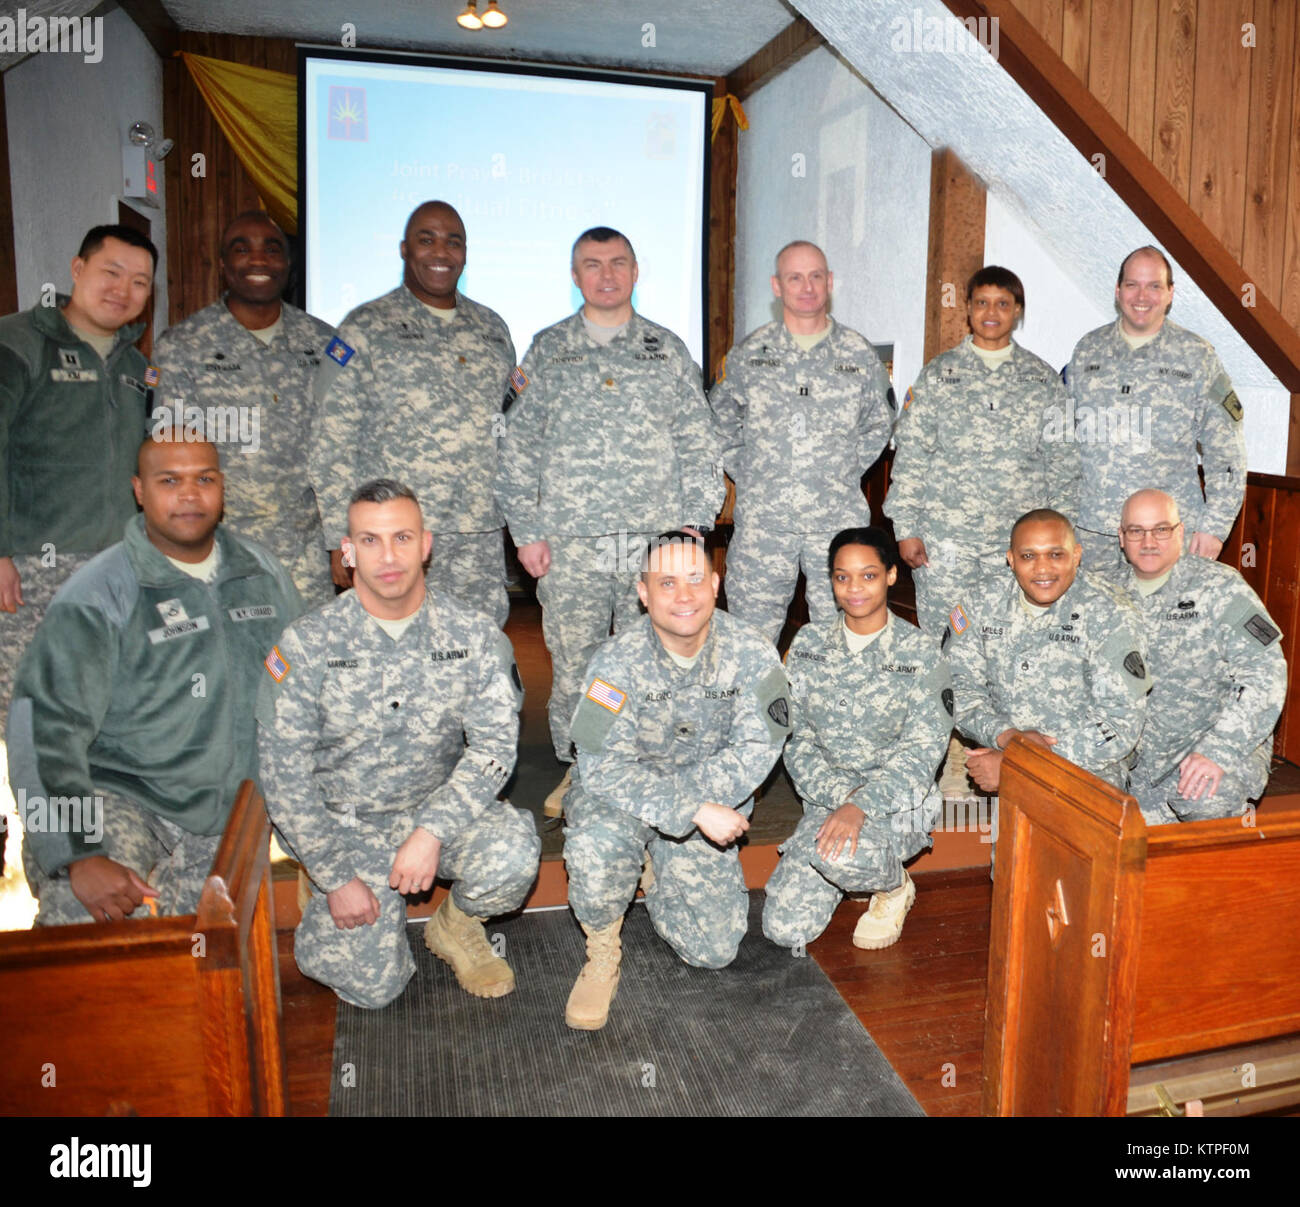 CAMP SMITH TRAINING SITE, CORTLANDT MANOR, N.Y. –  Unit ministry teams from the 53rd Troop Command and the New York Guard pose together after the  joint Prayer Breakfast held at the Chaplain Duffy Chapel and Spiritual Fitness Center on January 10th 2015, which brought together Soldiers and Chaplains of all faiths and denominations to discuss Spiritual Readiness and Soldier resiliency.   The focus of the gathering, led by more than a half dozen military chaplains and lay leaders, emphasized the important role of Spiritual Readiness as part of Soldier resiliency and overall Comprehensive Soldier Stock Photo